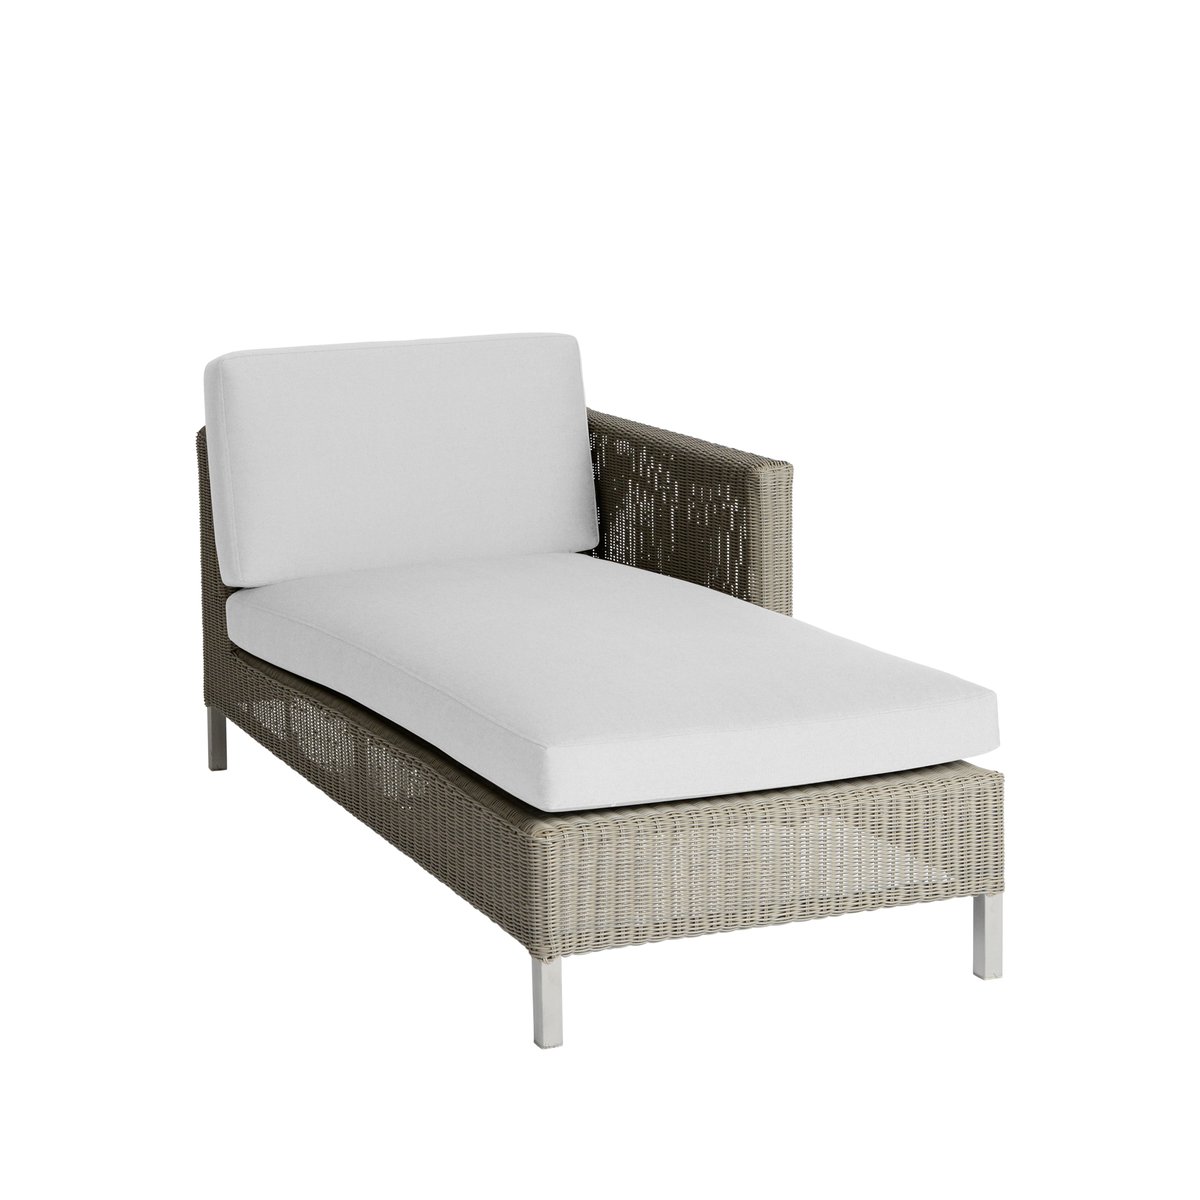 Cane-line Connect chaise longue Taupe, witte kussens